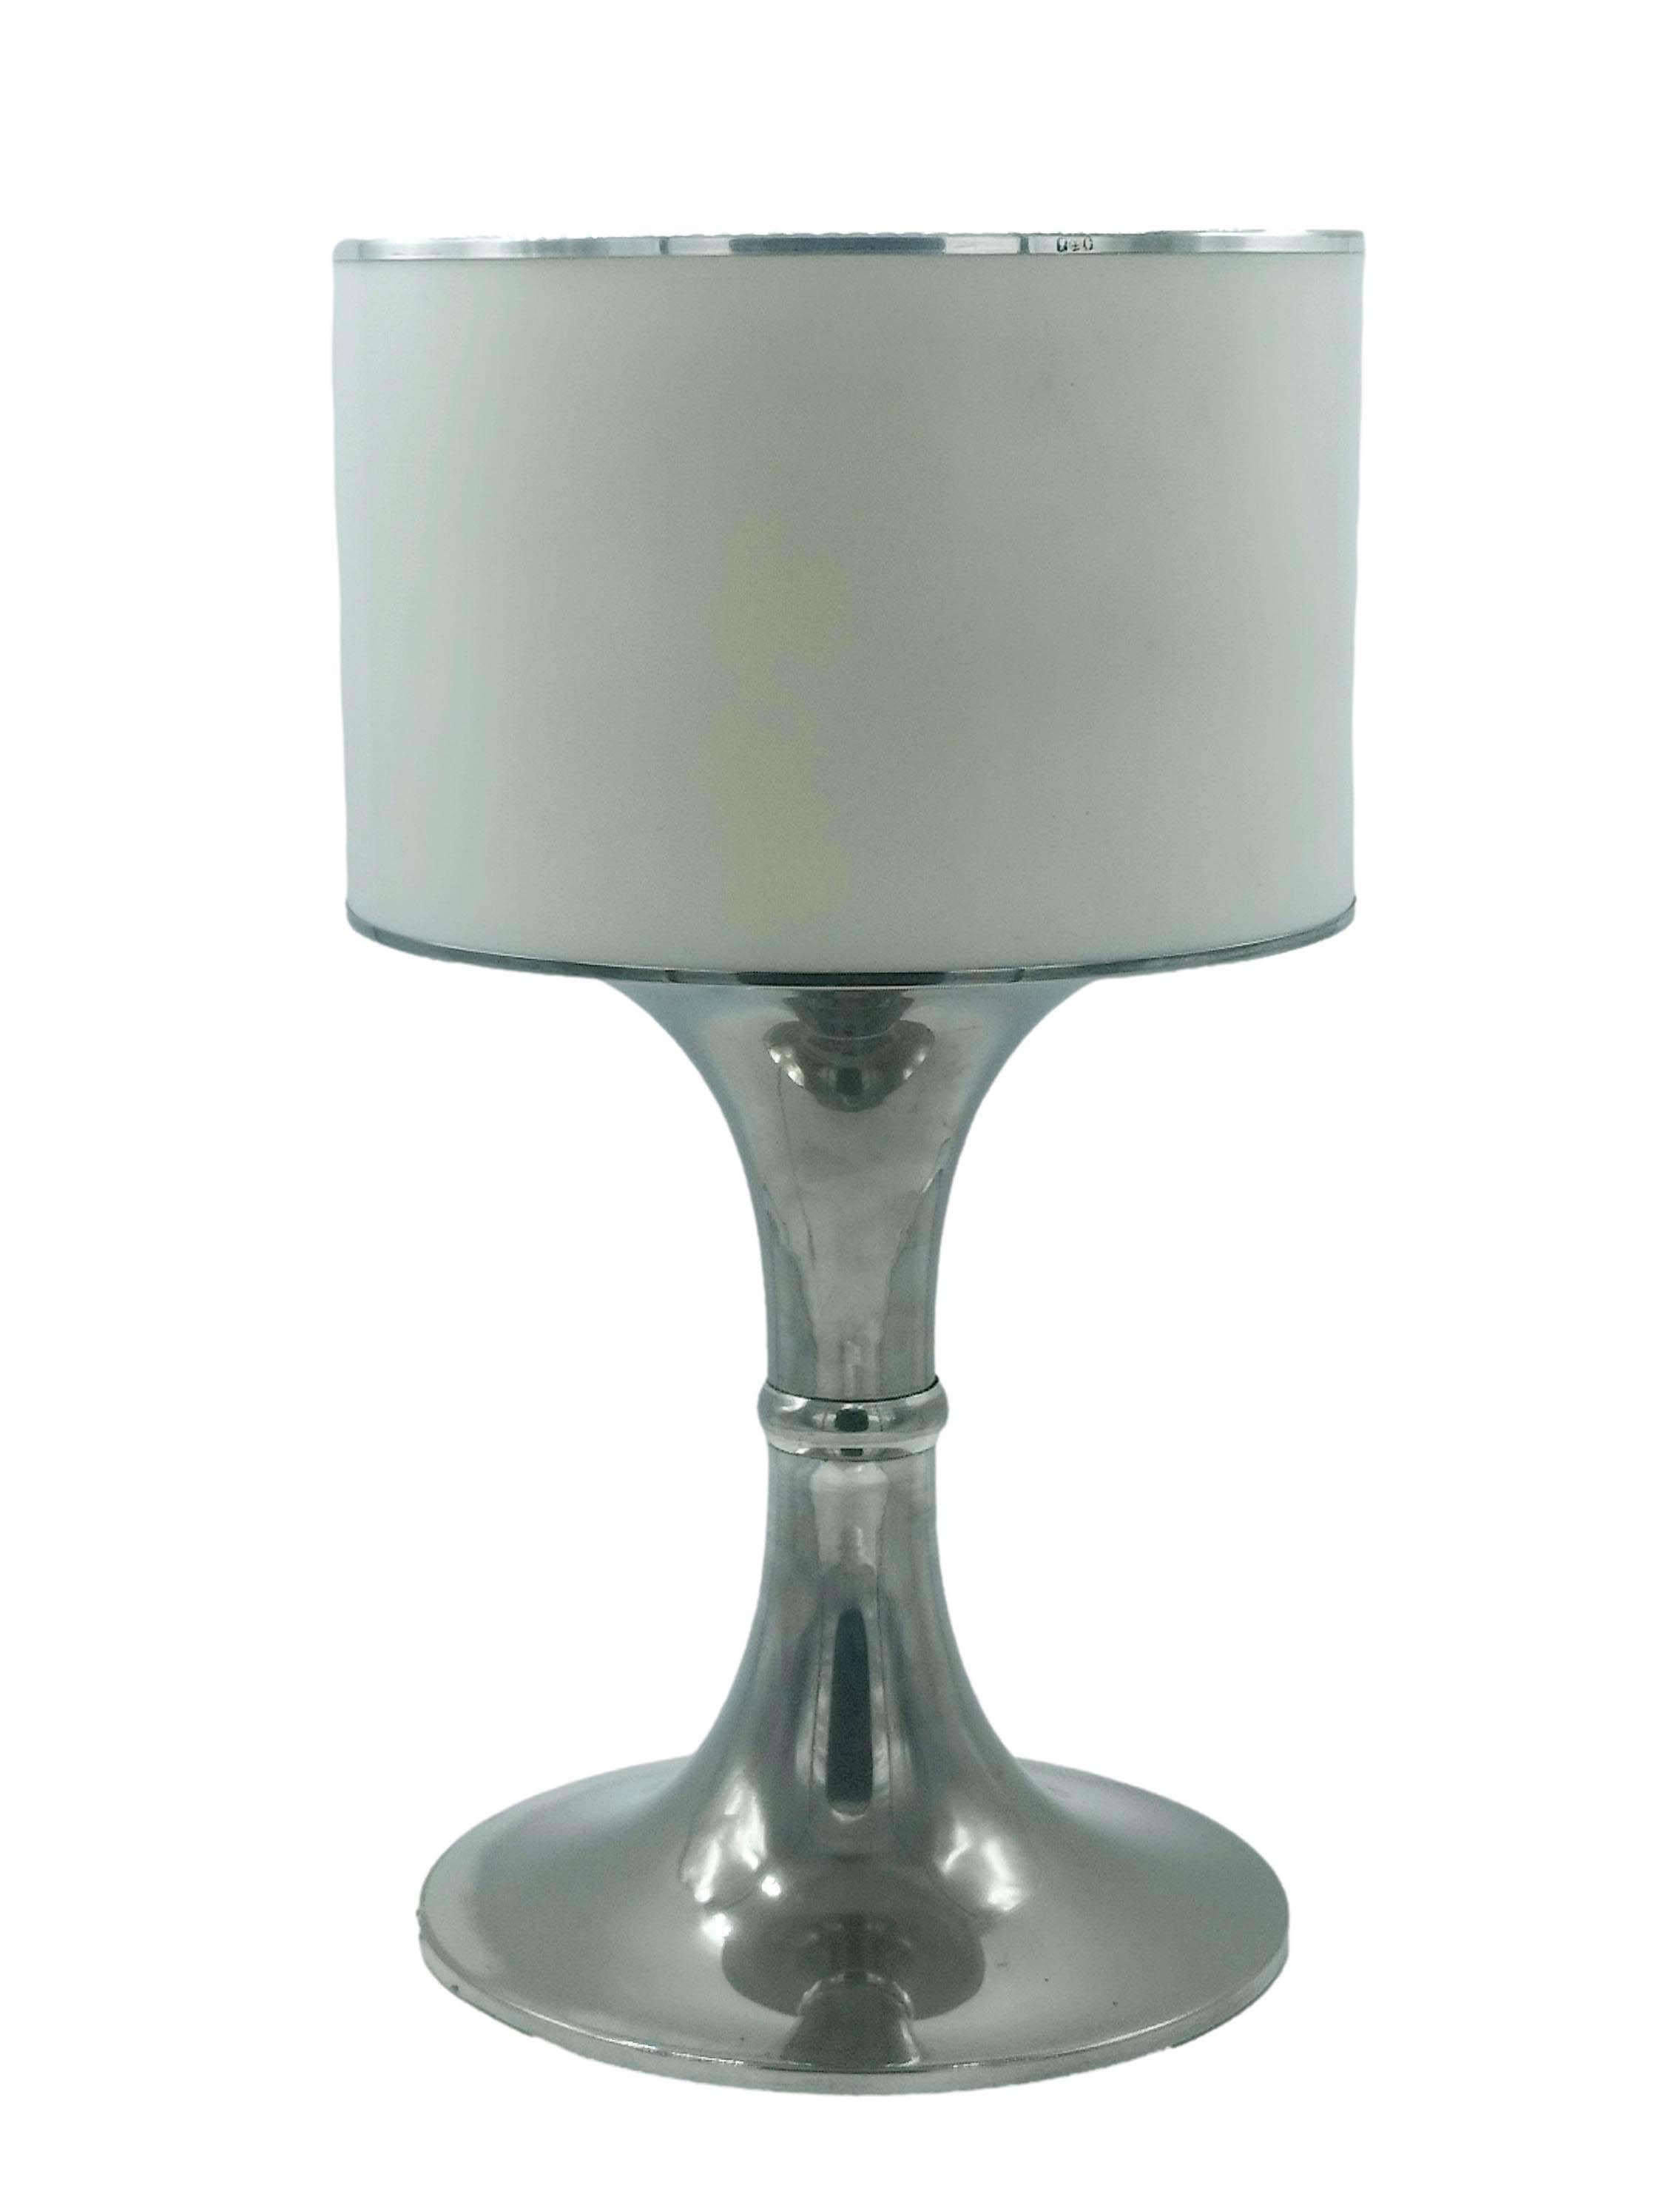 Mid-Century Modern Silver Metal Table Lamp with White Perspex Shade, Italy 1970s For Sale